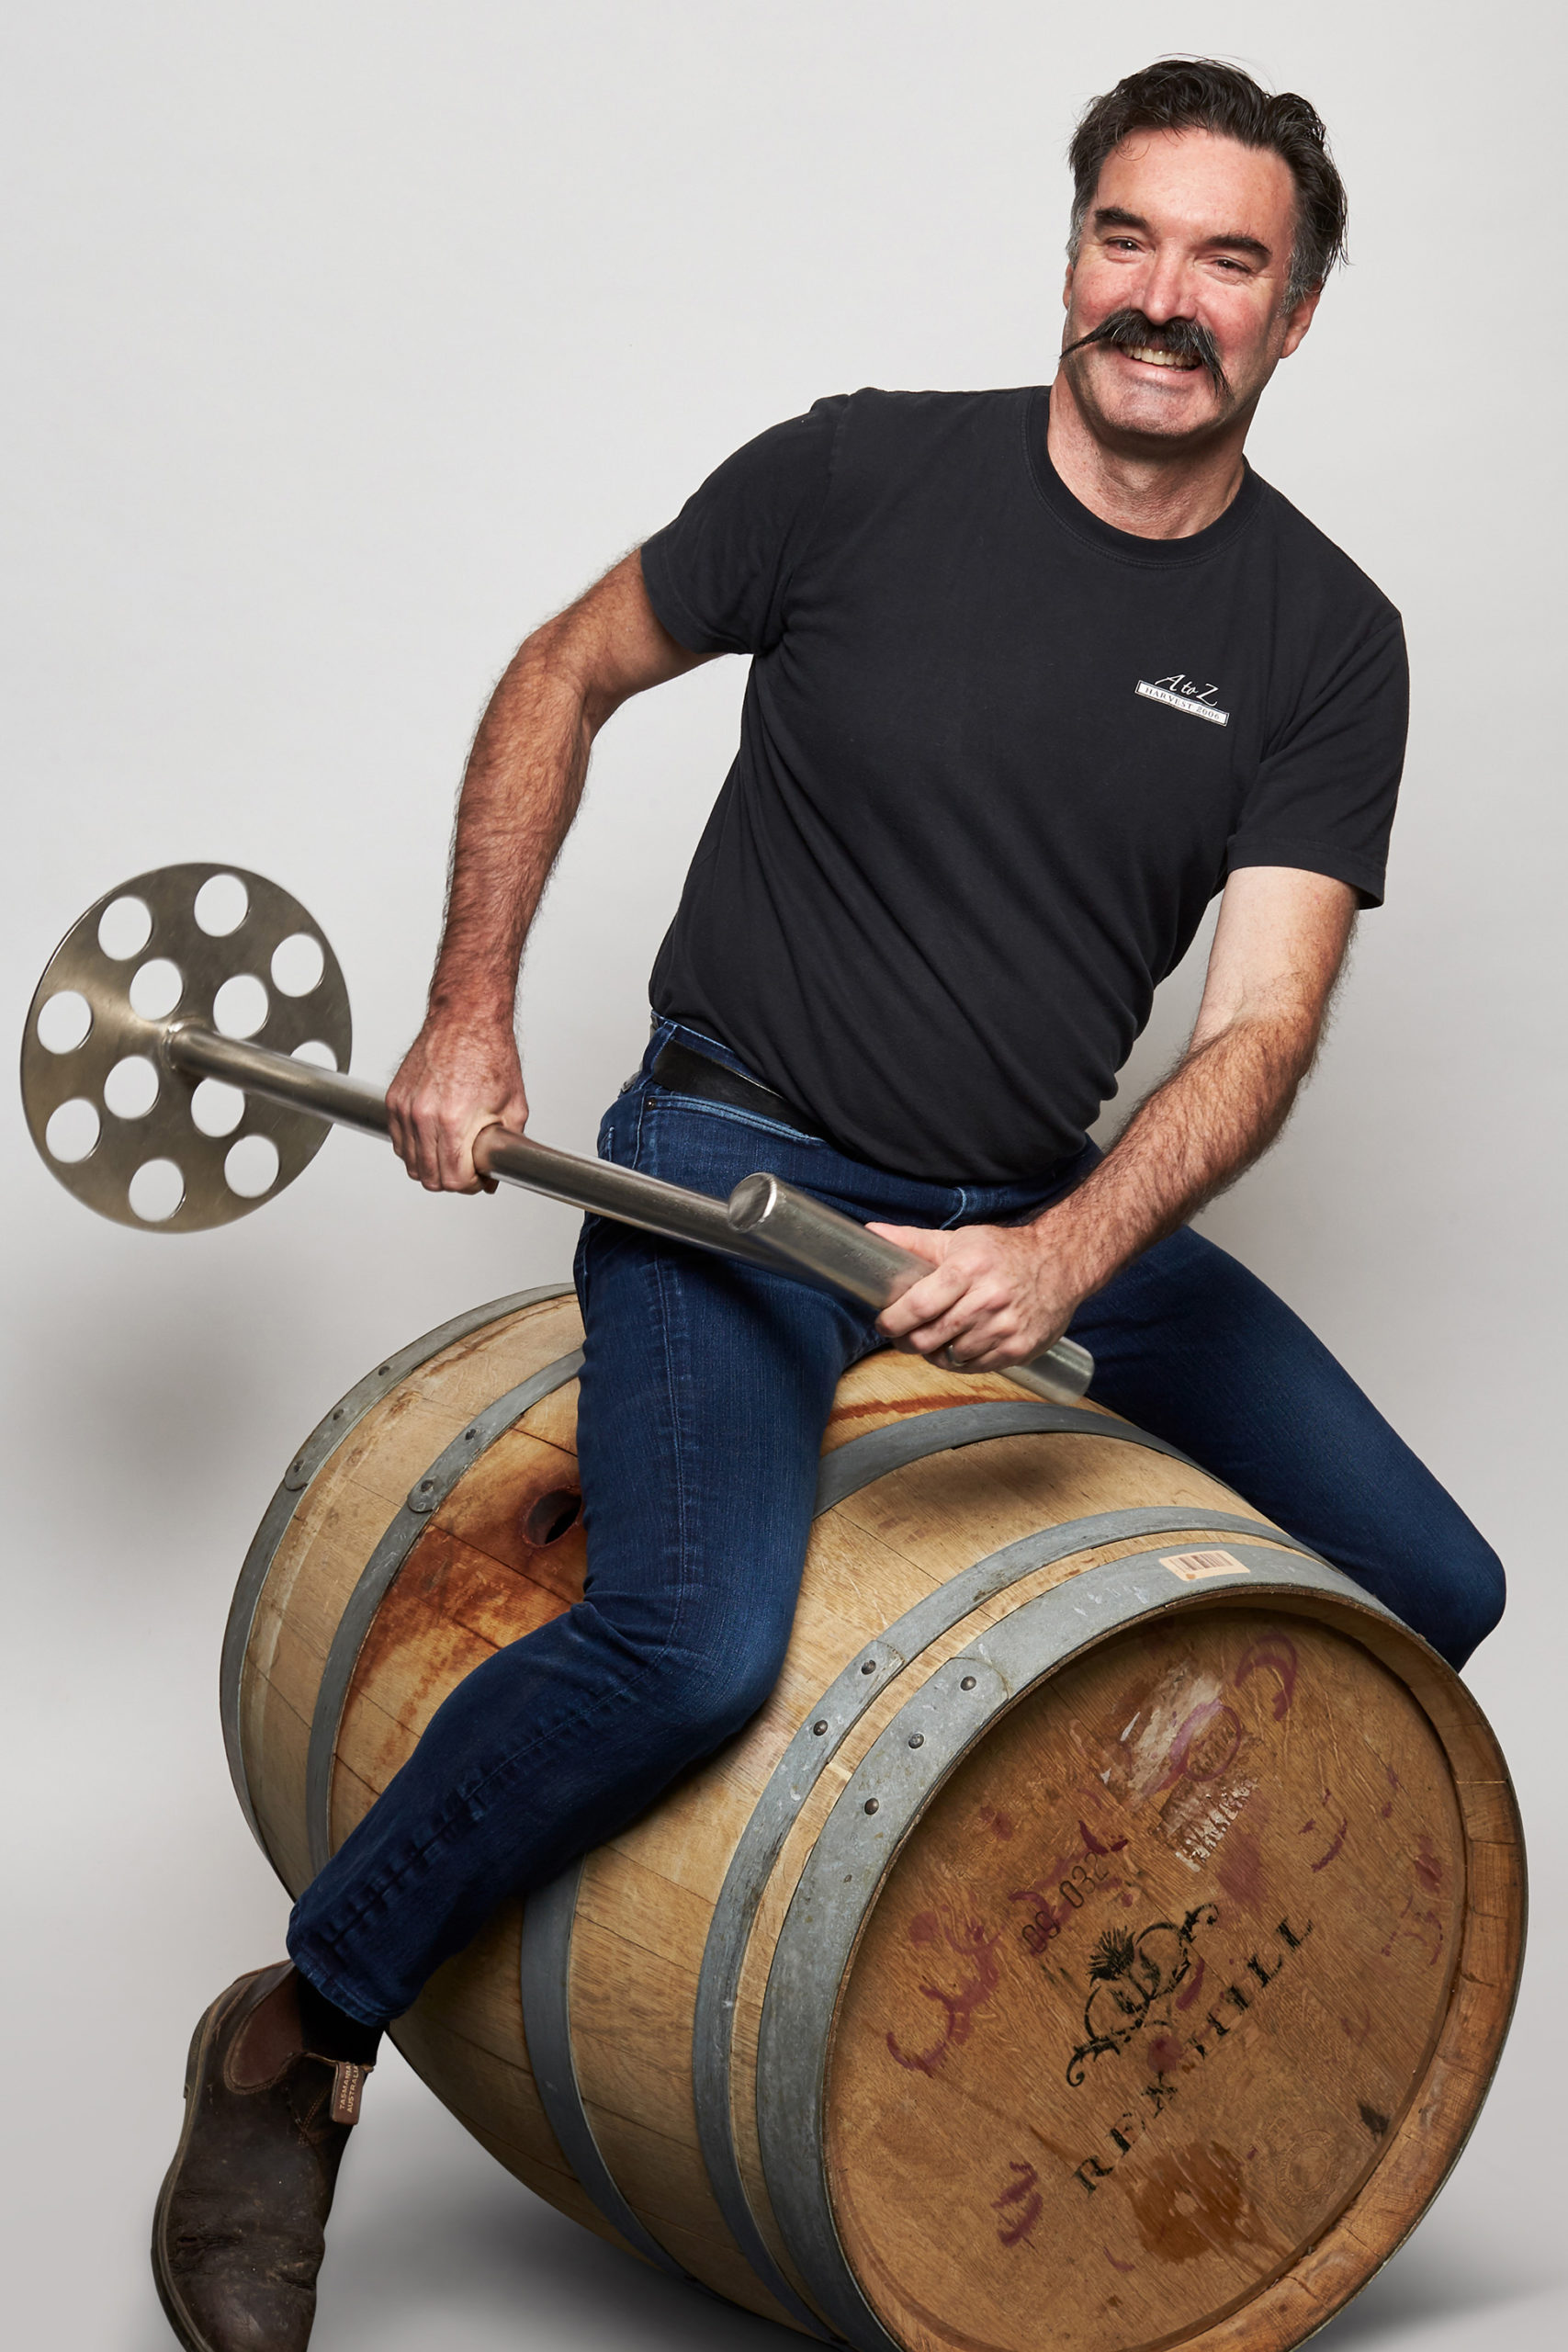 Michel rowing on barrel with tool